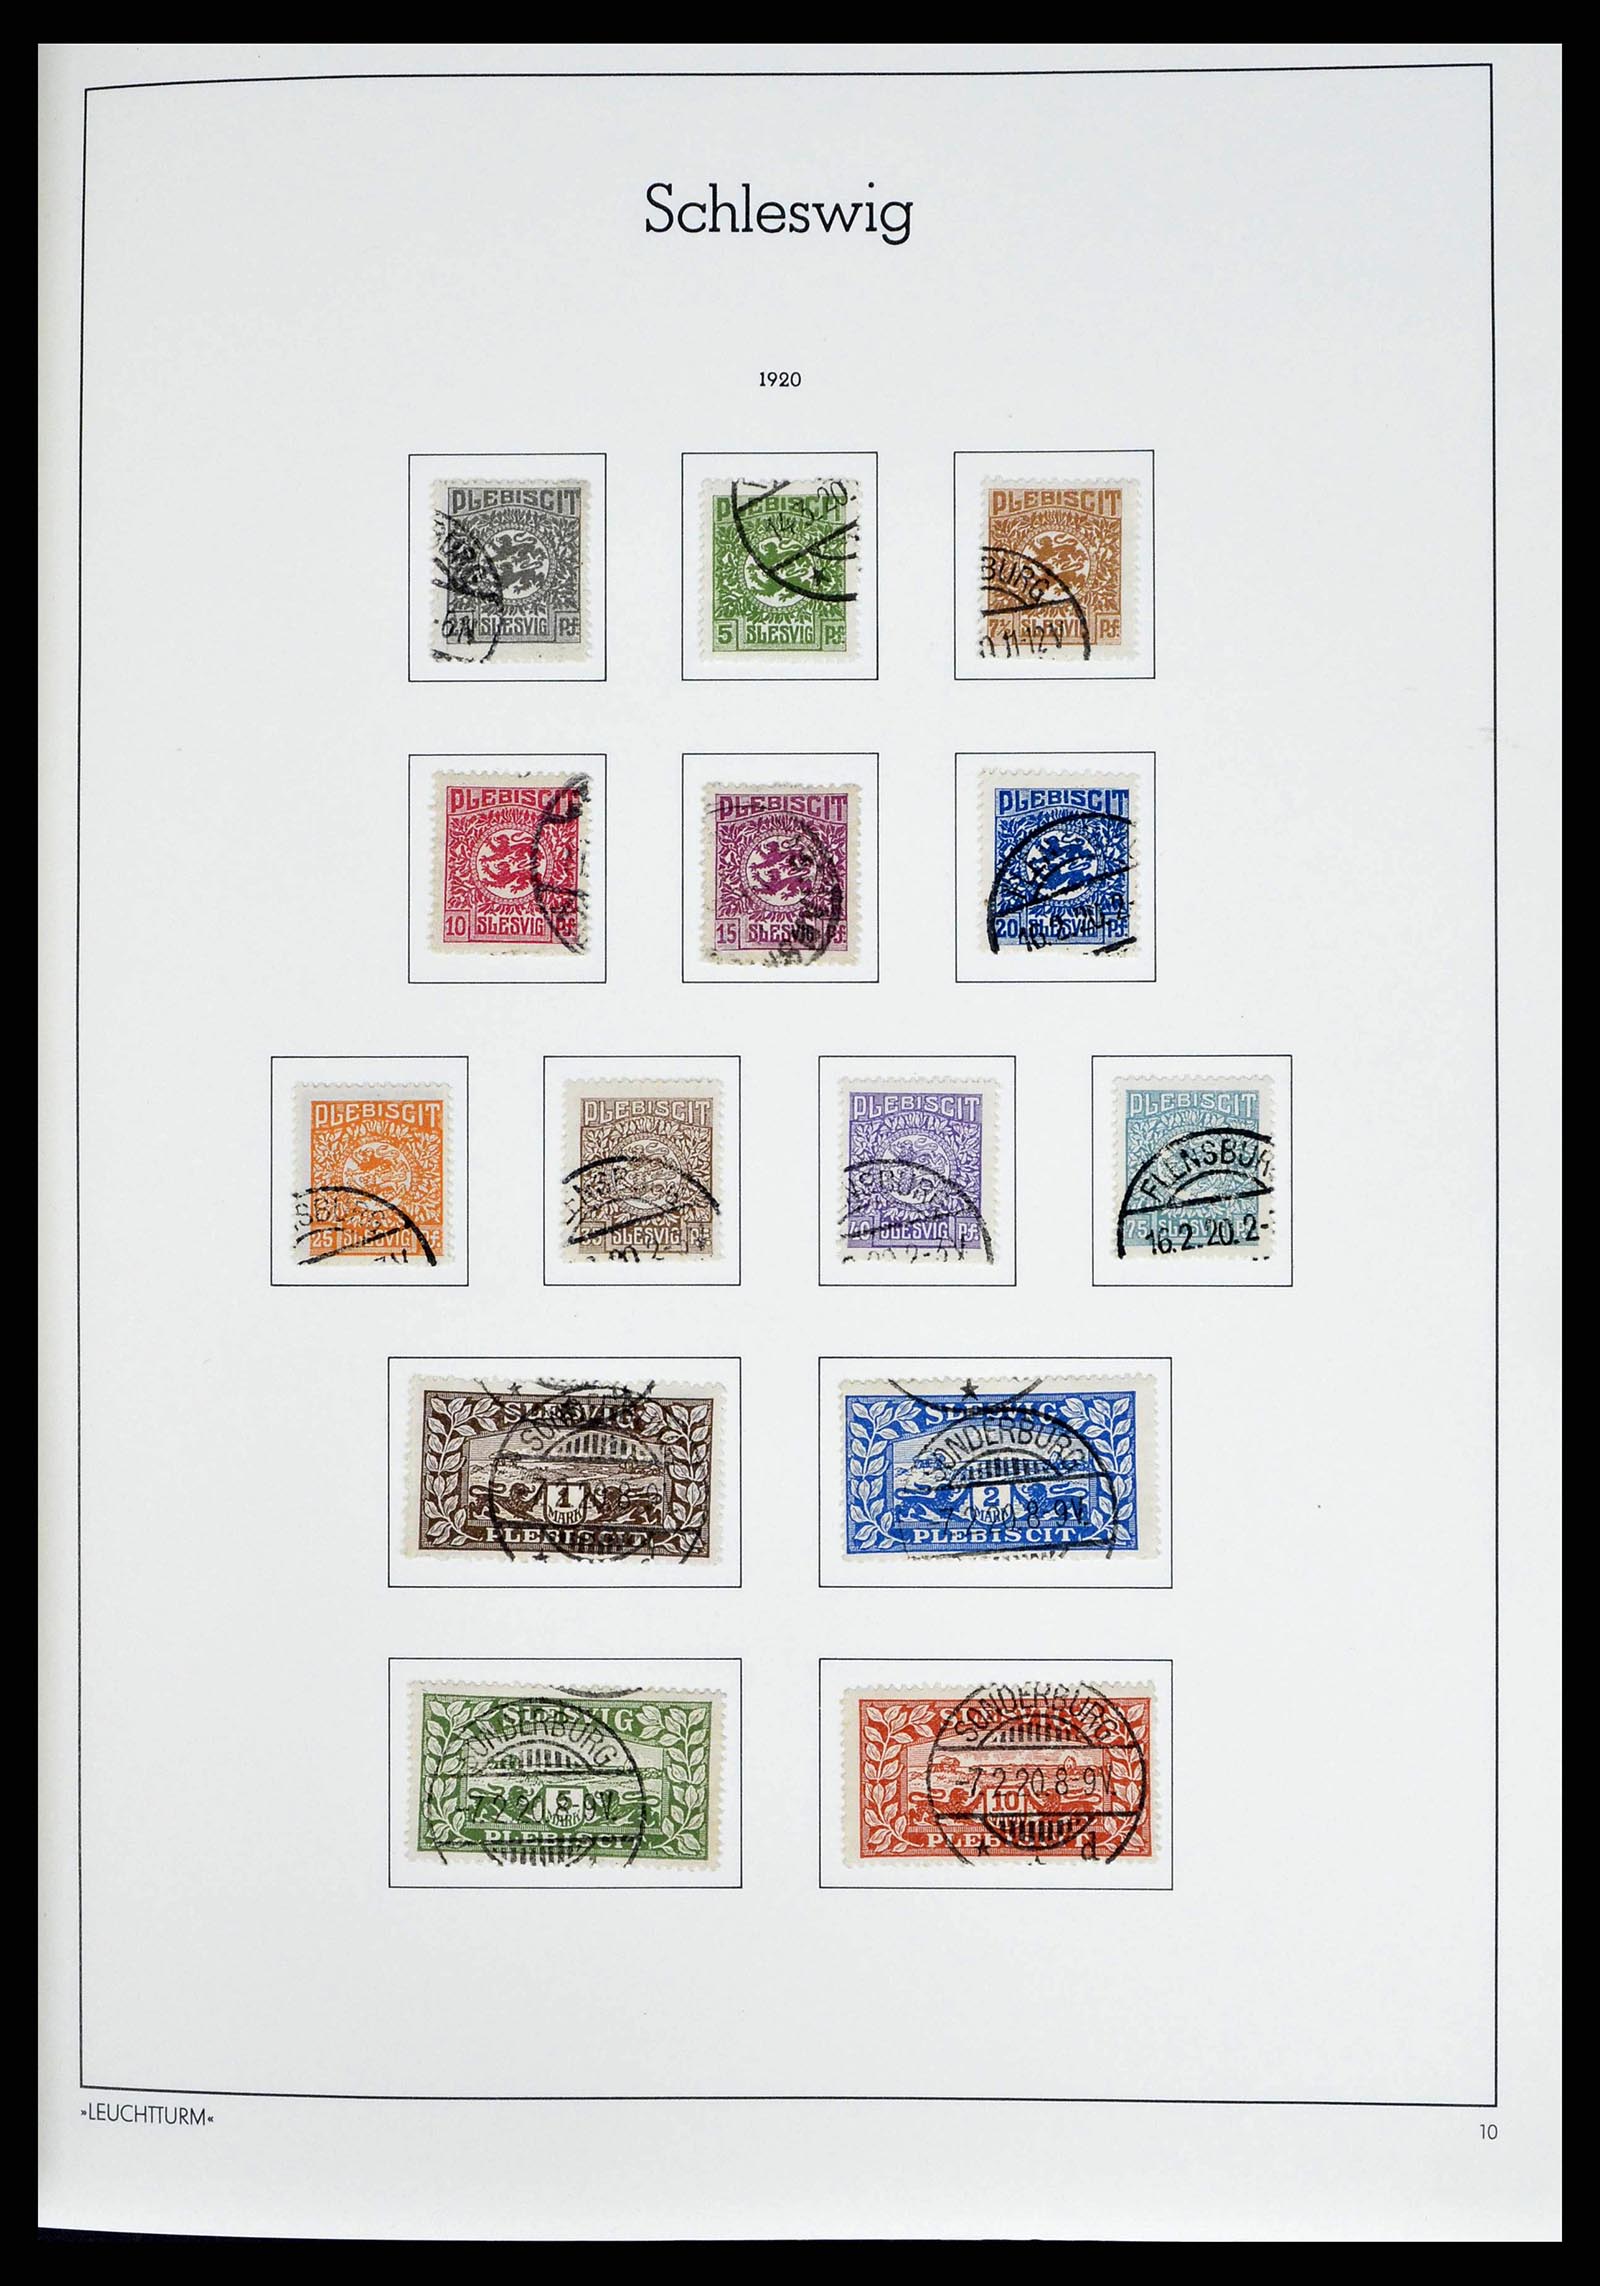 38501 0013 - Stamp collection 38501 German territories and occupations 1920-1945.